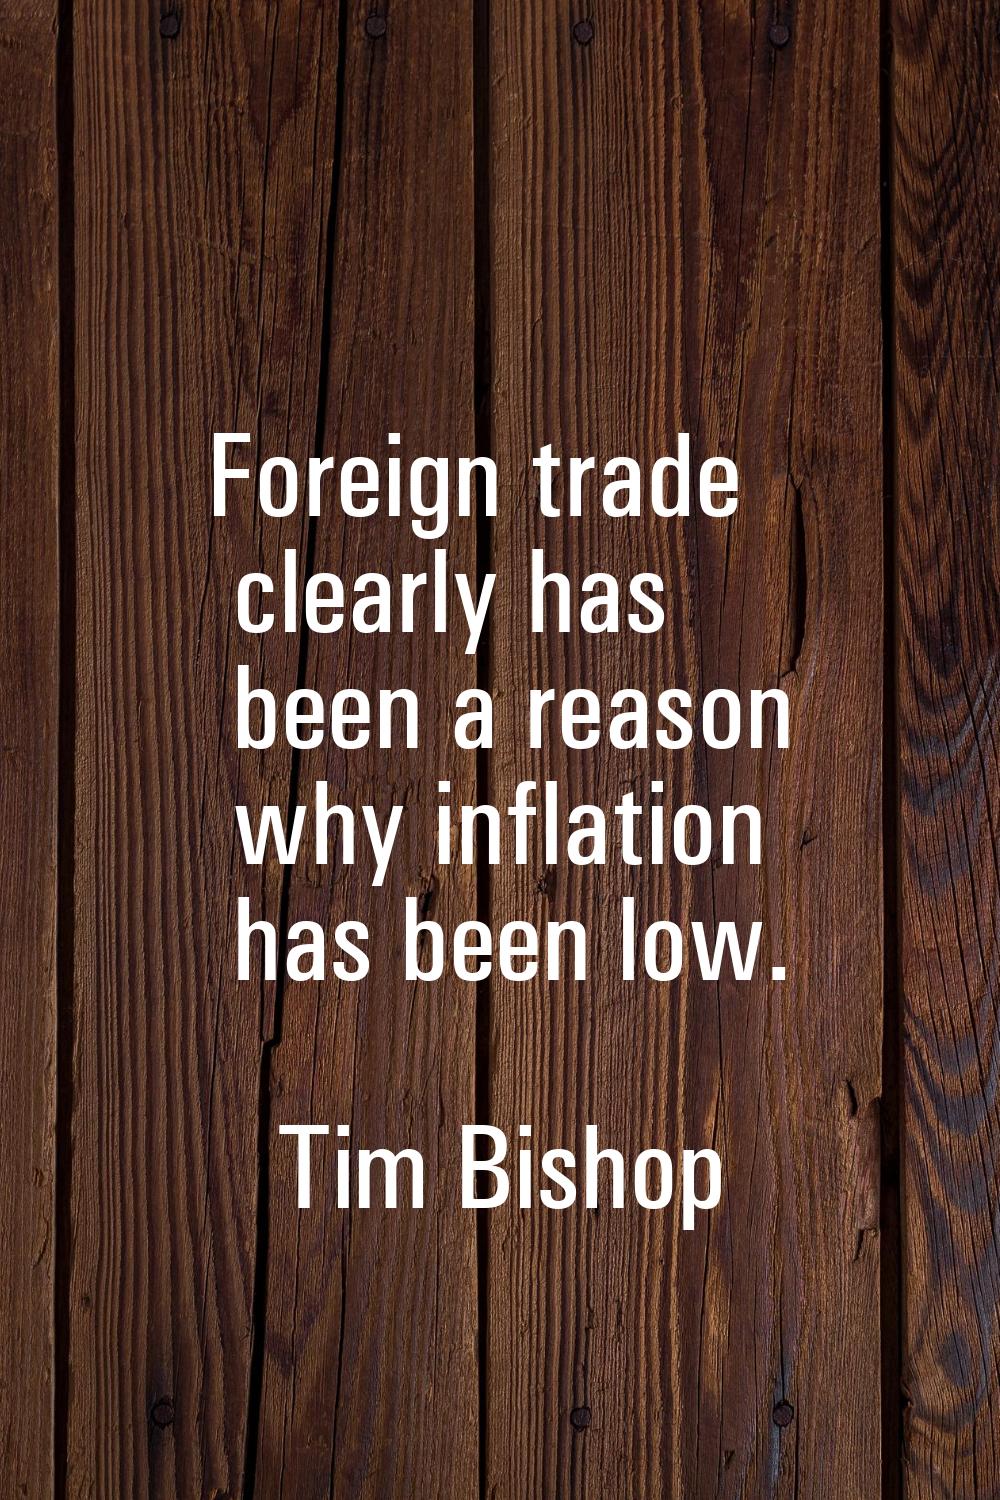 Foreign trade clearly has been a reason why inflation has been low.